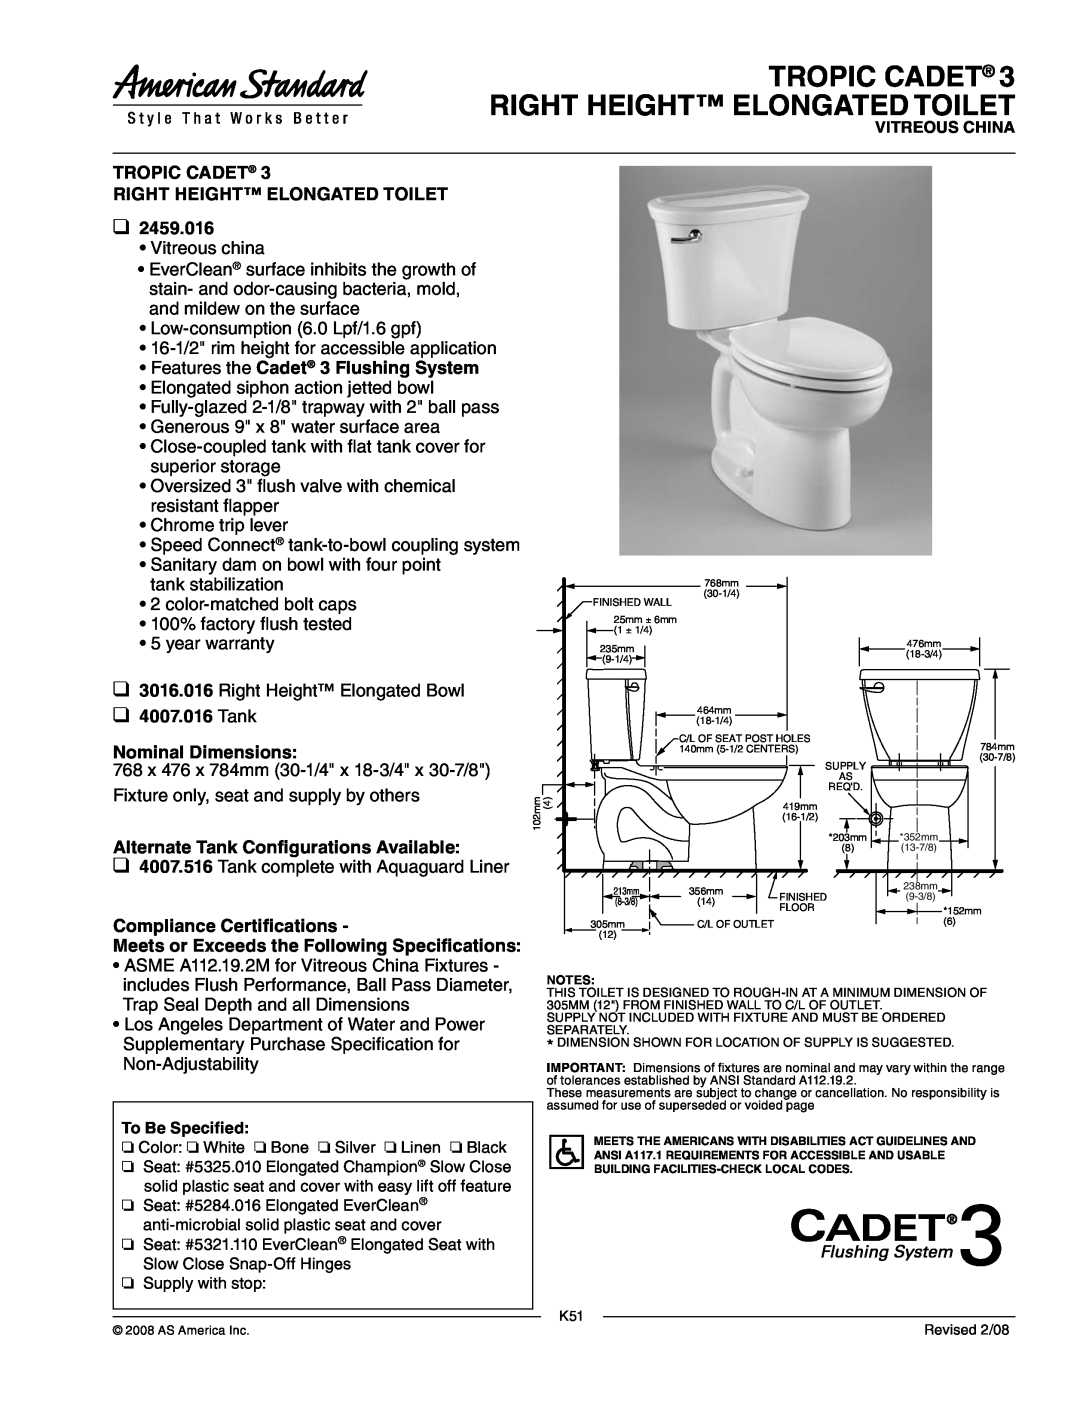 American Standard 2459.016 warranty TROPIC CADET 3 RIGHT HEIGHT ELONGATED TOILET, Features the Cadet 3 Flushing System 